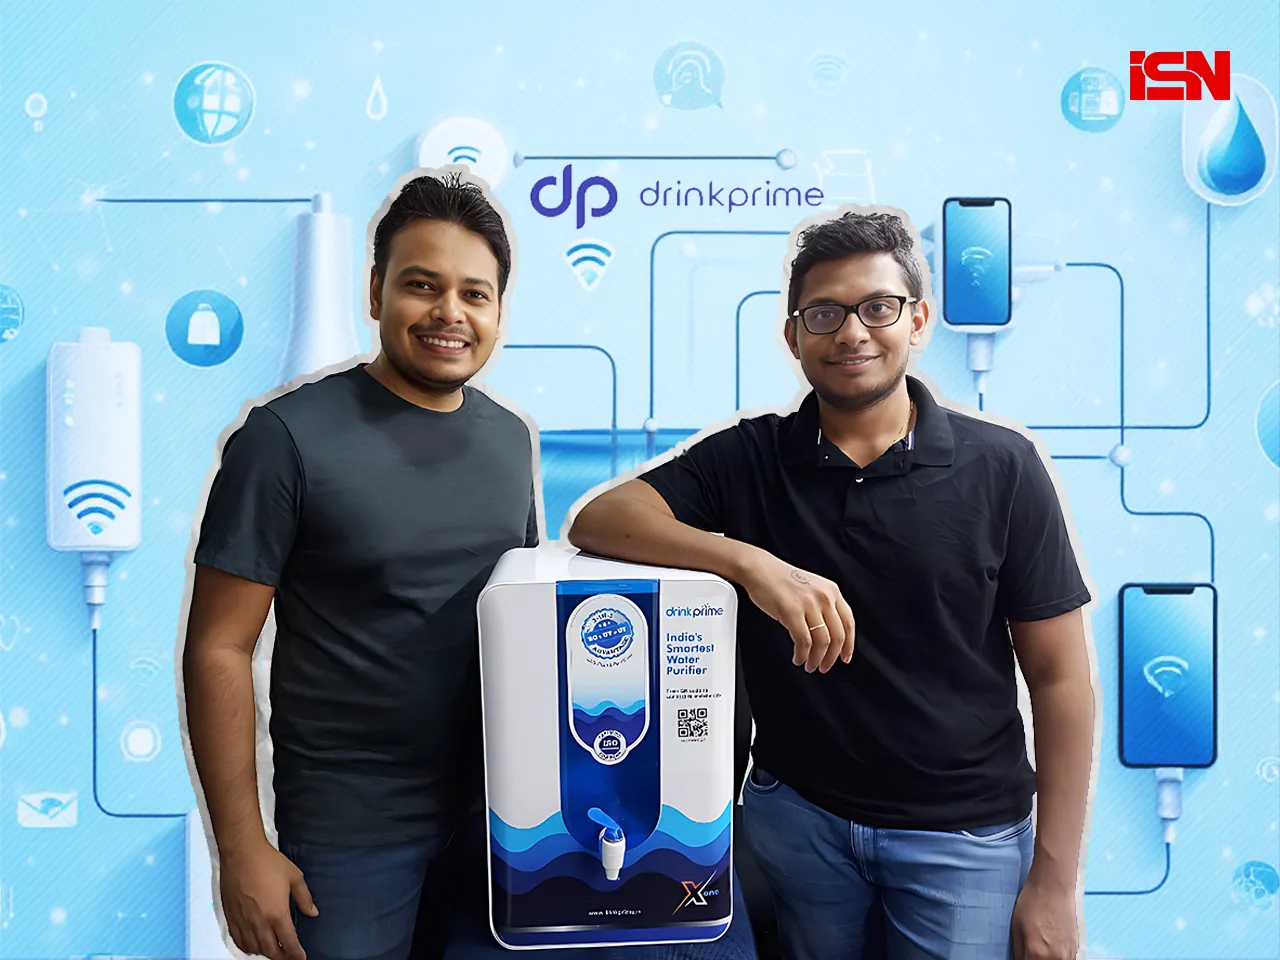 DrinkPrime specializing in RO water supply raises $3M from SIDBI Ventures